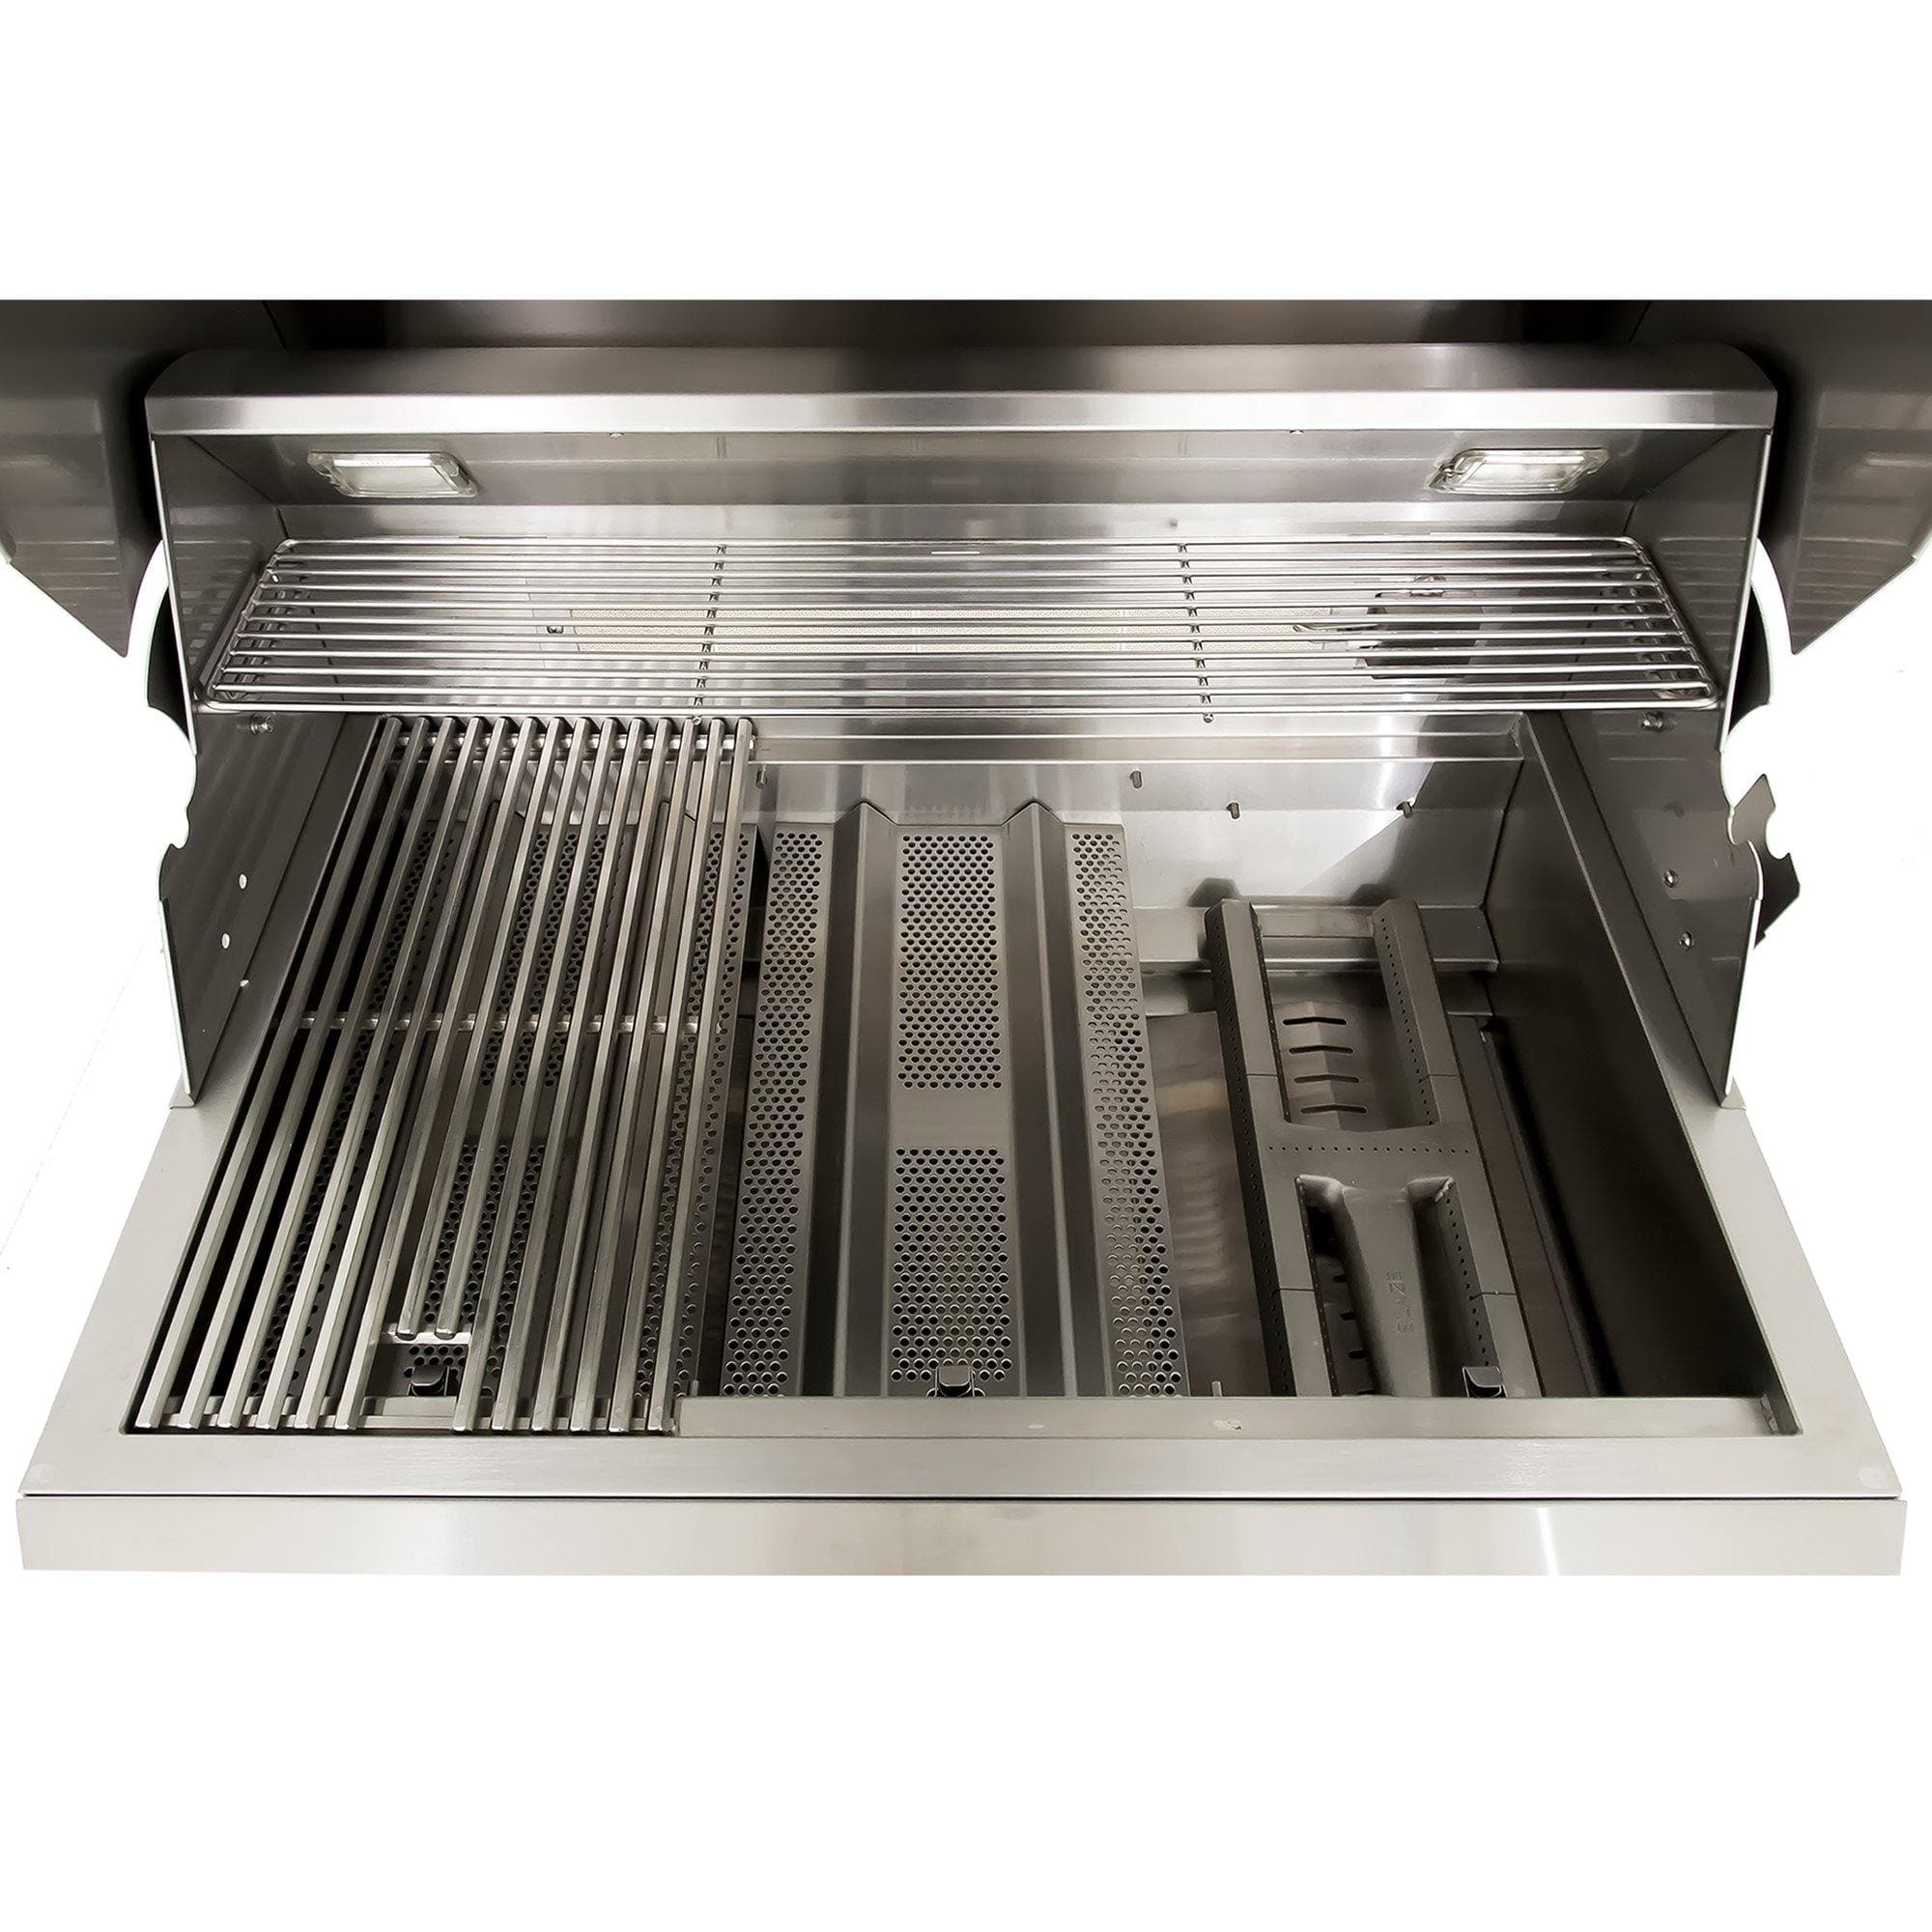 Blaze Professional LUX 34" 3-Burner Built-In Gas Grill With Rear Infrared Burner I The BBQHQ